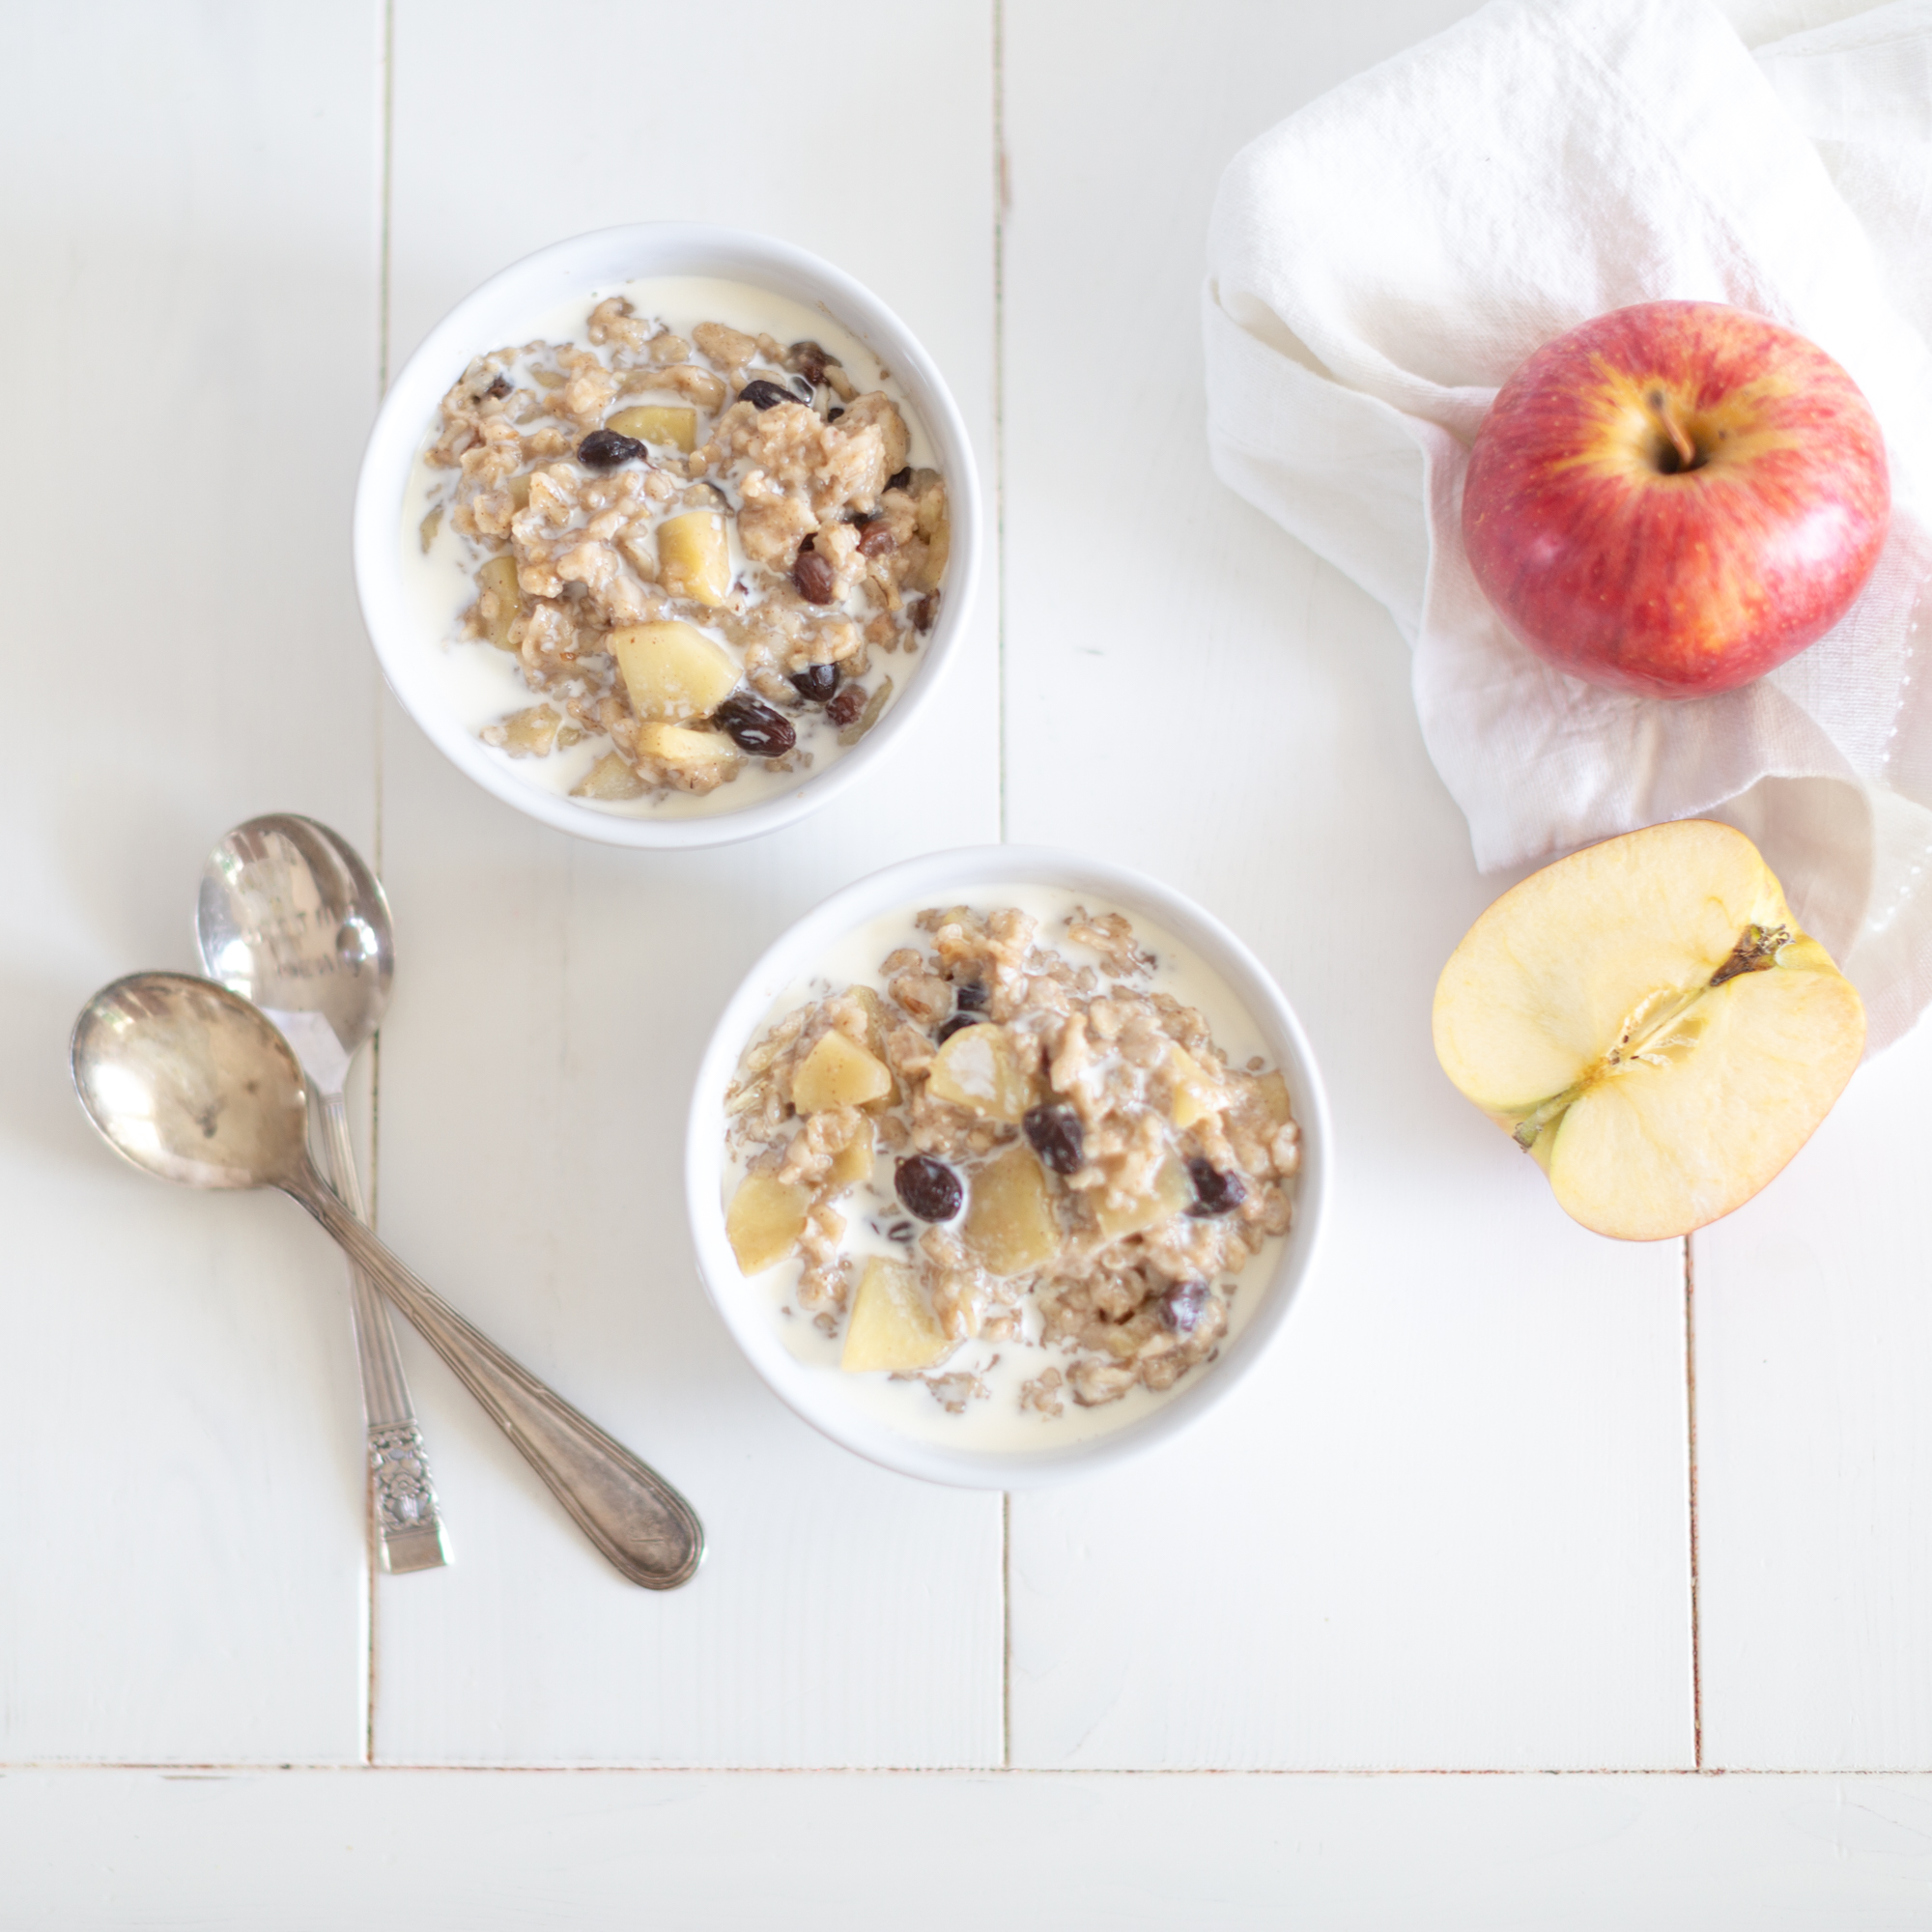 Kid friendly Oatmeal for a thermos lunch.  Apple cinnamon oatmeal, Oatmeal,  Oats recipes